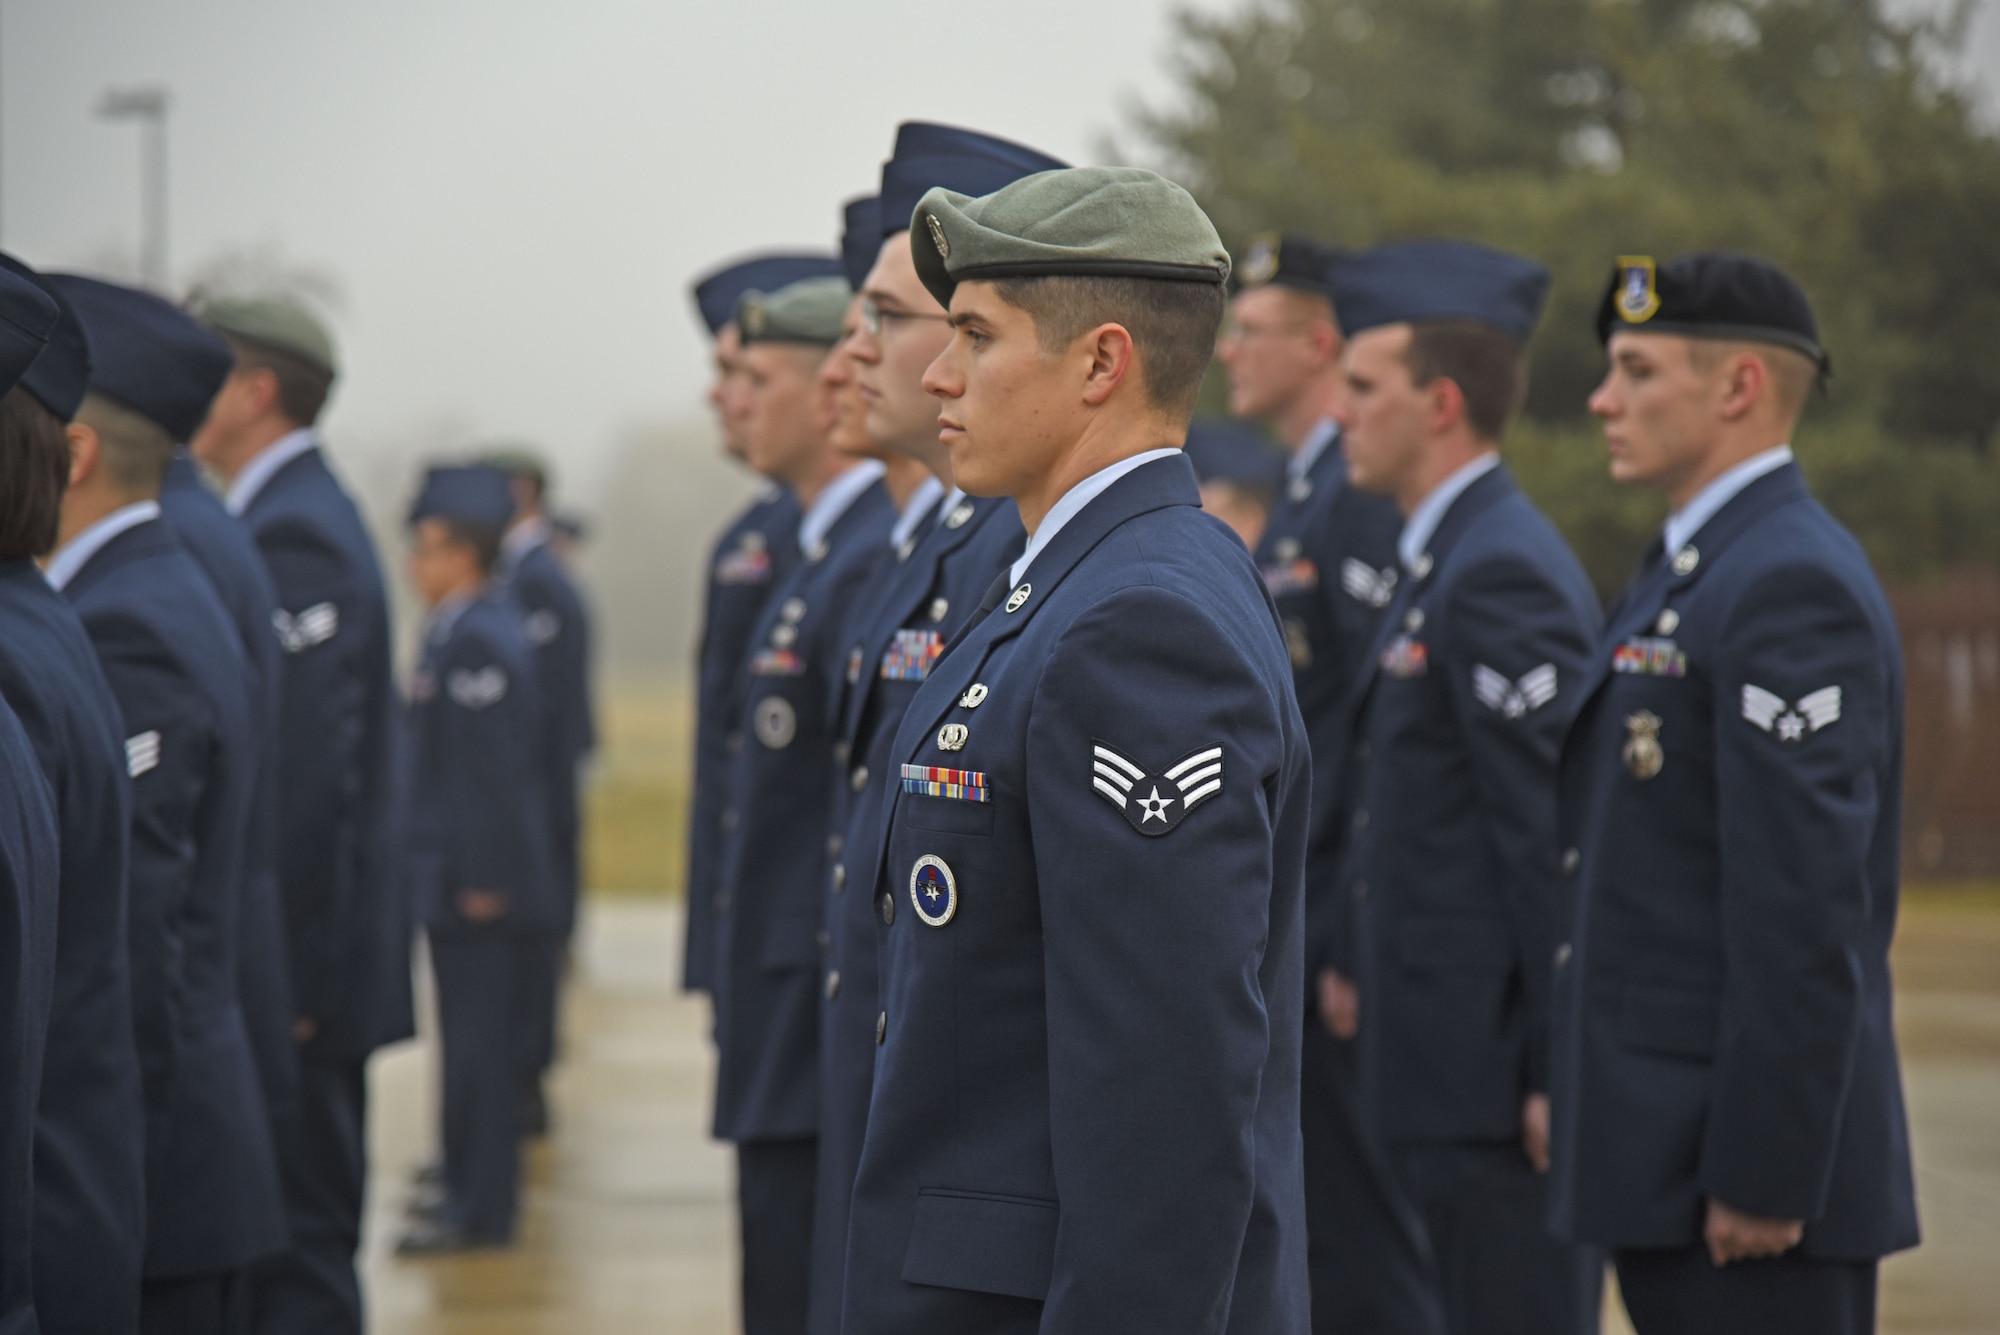 Airman Leadership School Class 18-A Tanker Flight conducts open ranks in preparation for a service dress uniform inspection Nov. 21, 2017, at Fairchild Air Force Base, Washington. The uniform inspections ensure Airmen are maintaining a professional appearance at all times. (U.S. Air Force photo/Senior Airman Mackenzie Richardson)